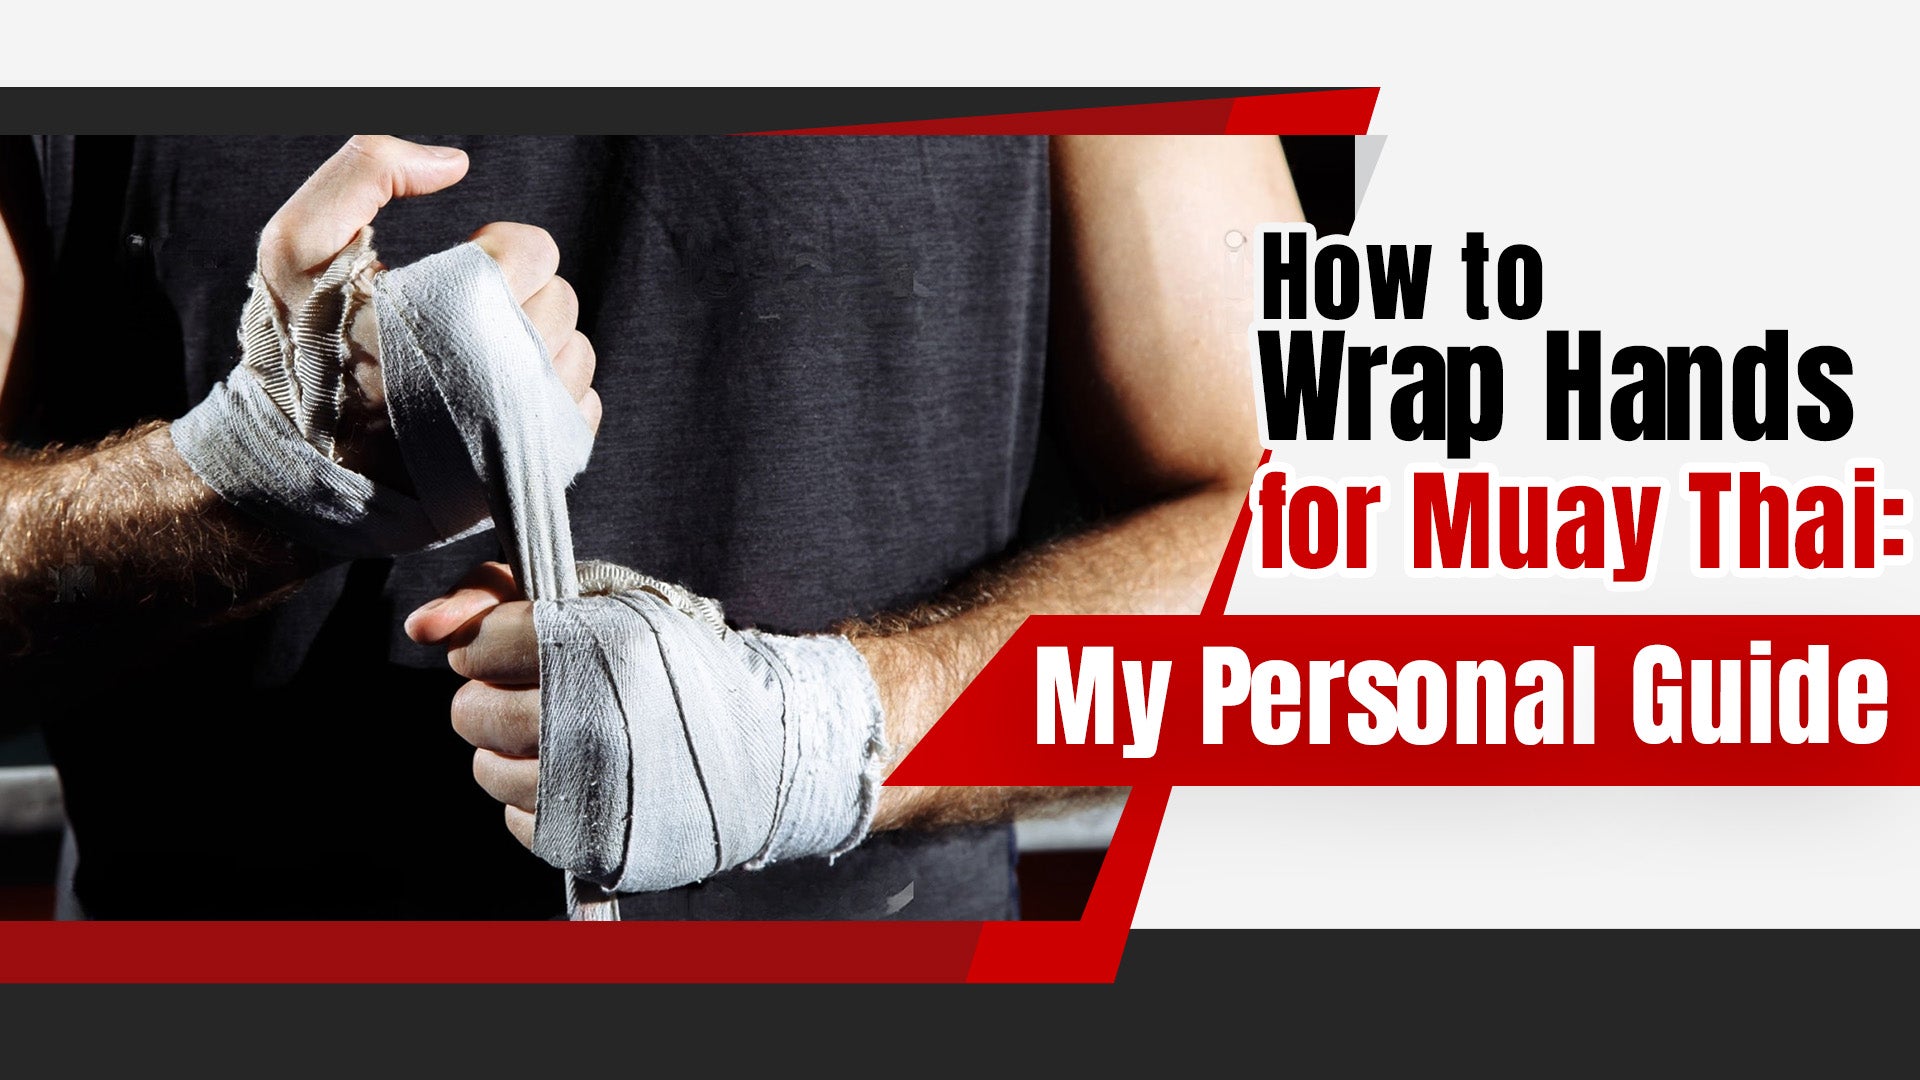 How to Wrap Hands for Muay Thai: My Personal Guide